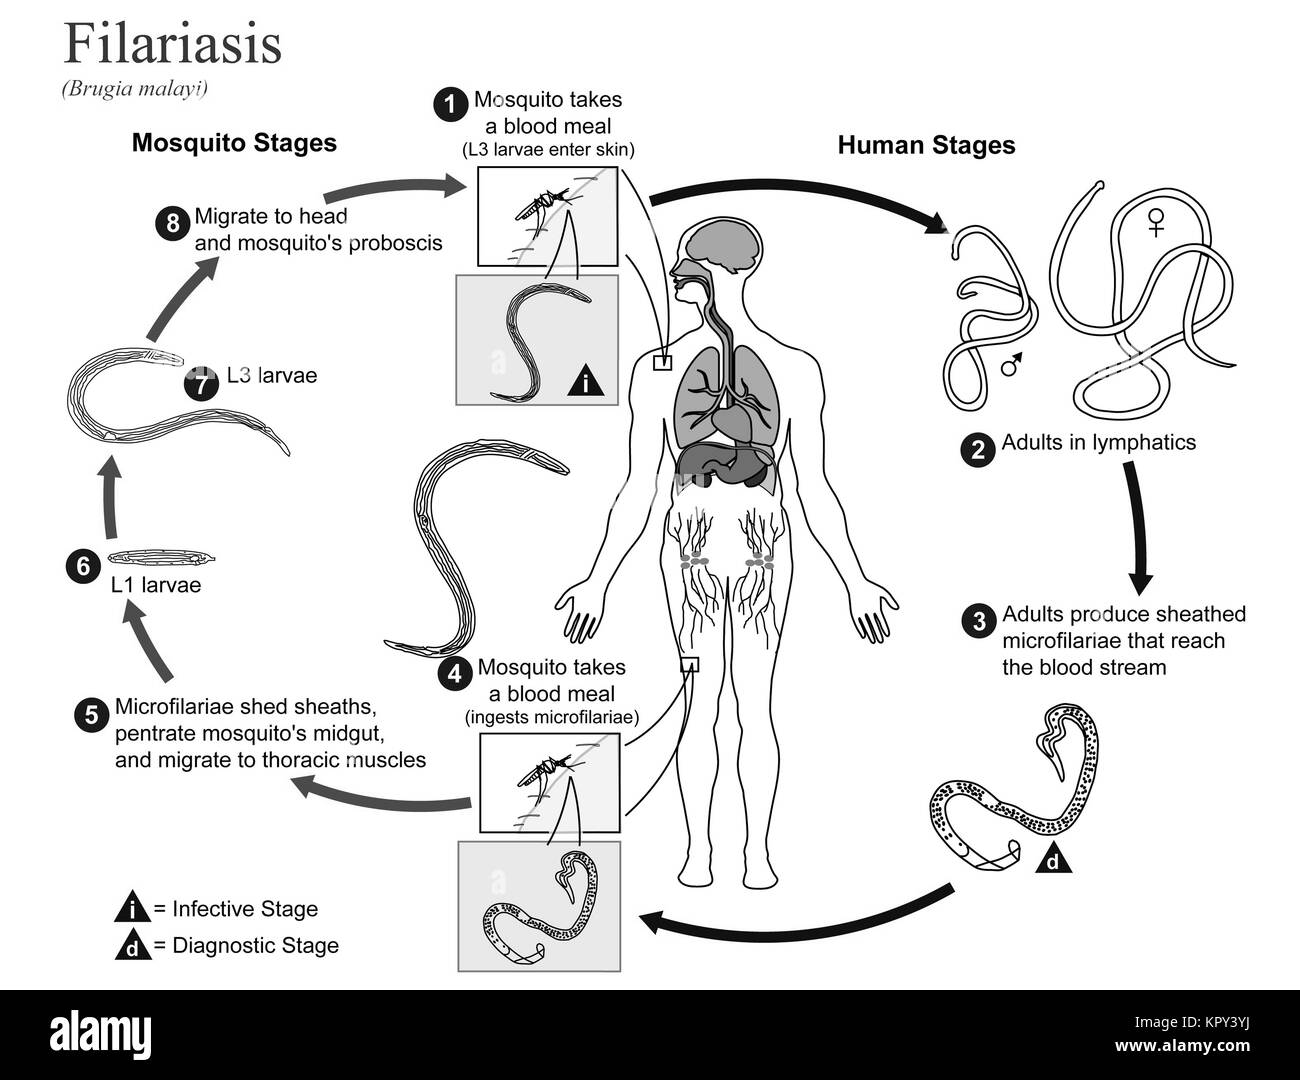 Illustrated diagram showing the life cycle of Brugia Malayi, the causal agent of Filariasis, 2002. Image courtesy CDC/Alexander J. da Silva, PhD/Melanie Moser. Stock Photo